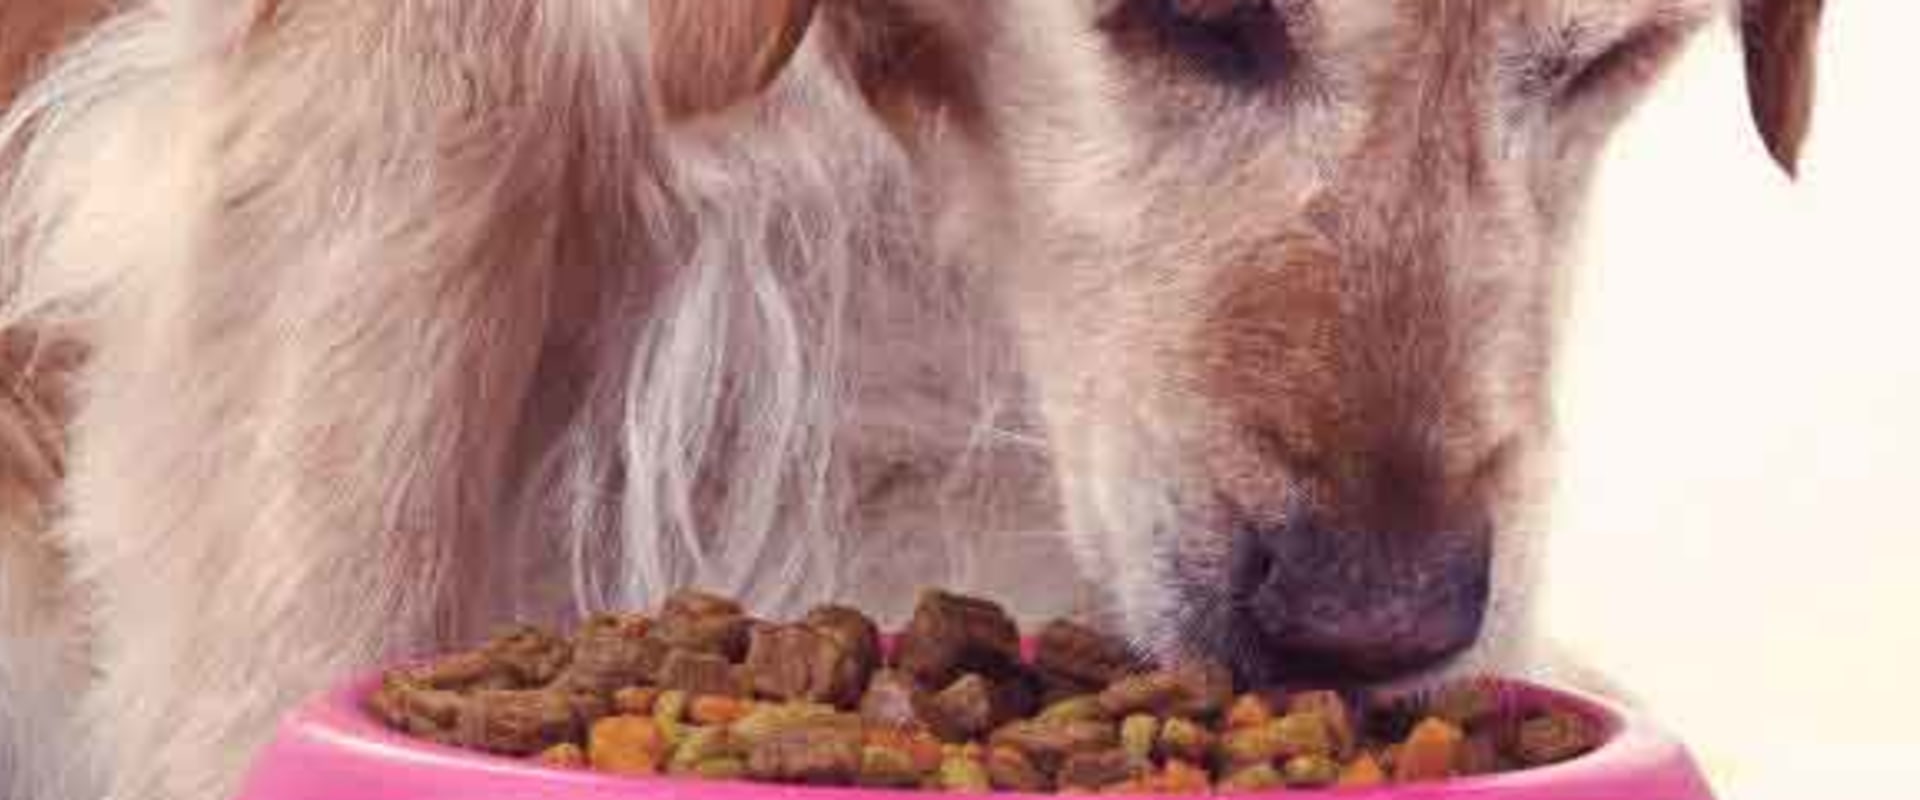 Is Your Pet Suffering from an Allergy or Sensitivity to Food?